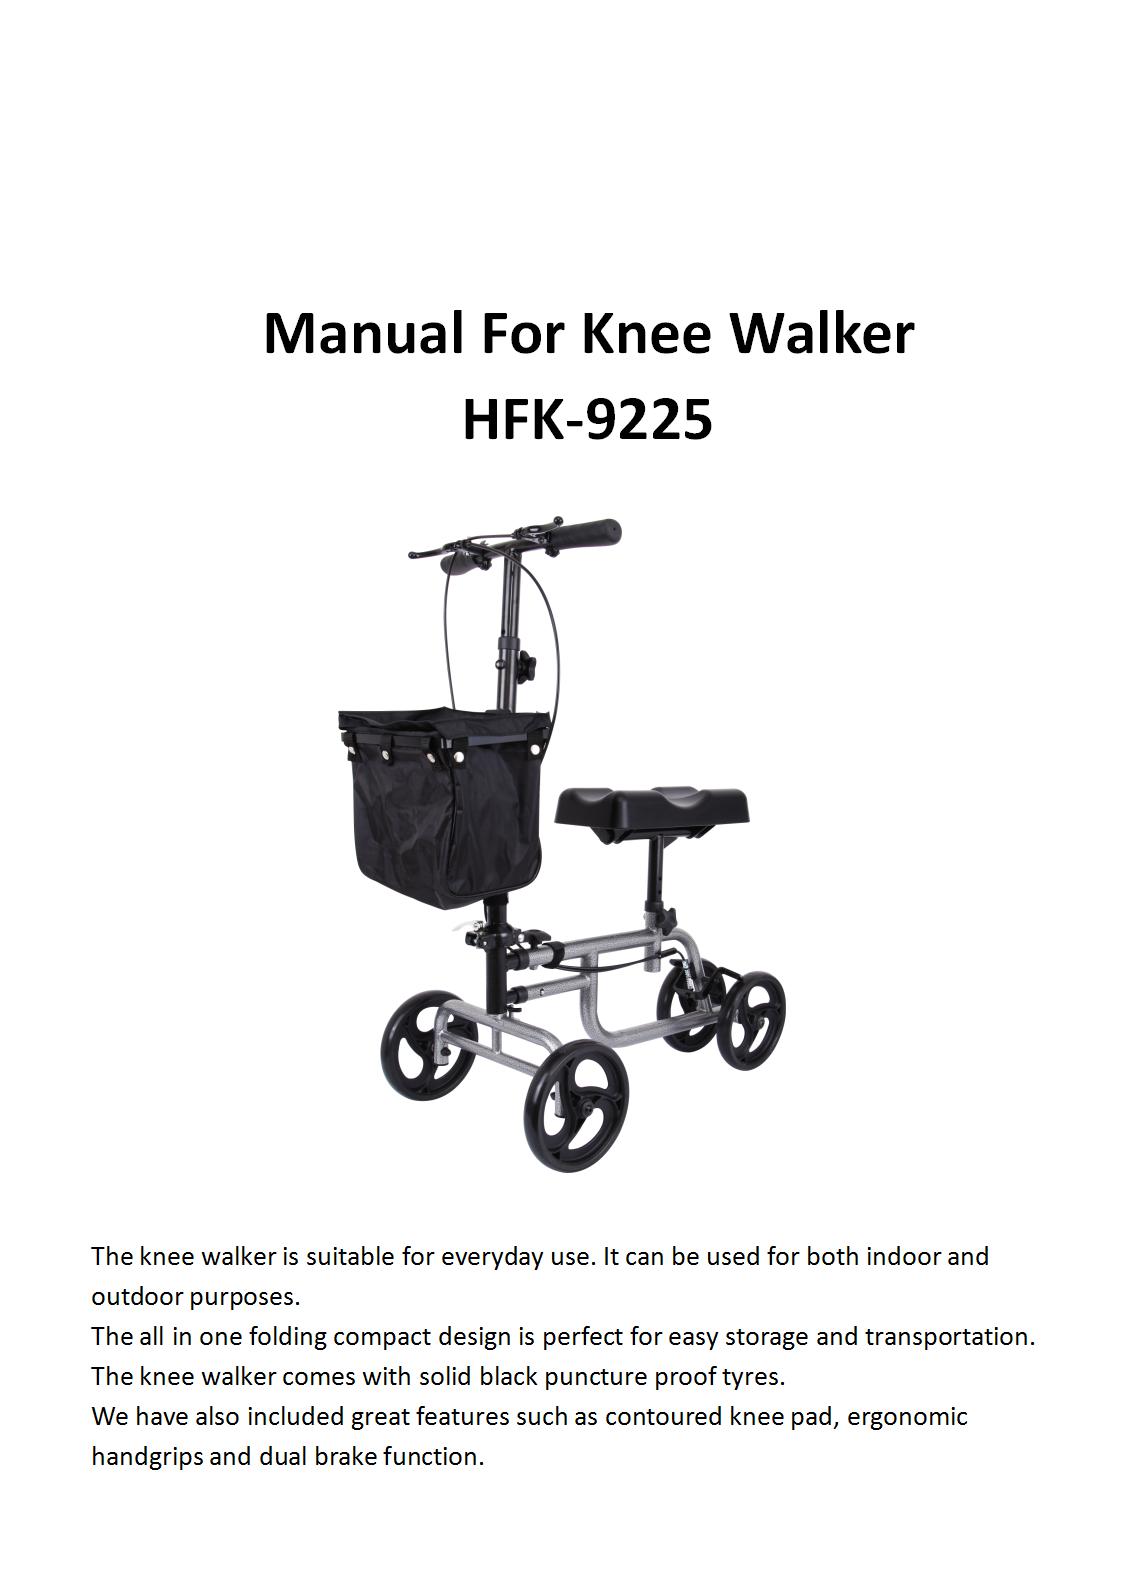 Knee-Walker-Scooter-Foldable-Adjusted-Height-Walking-Aid-Knee-Support-and-Basket-1940439-3